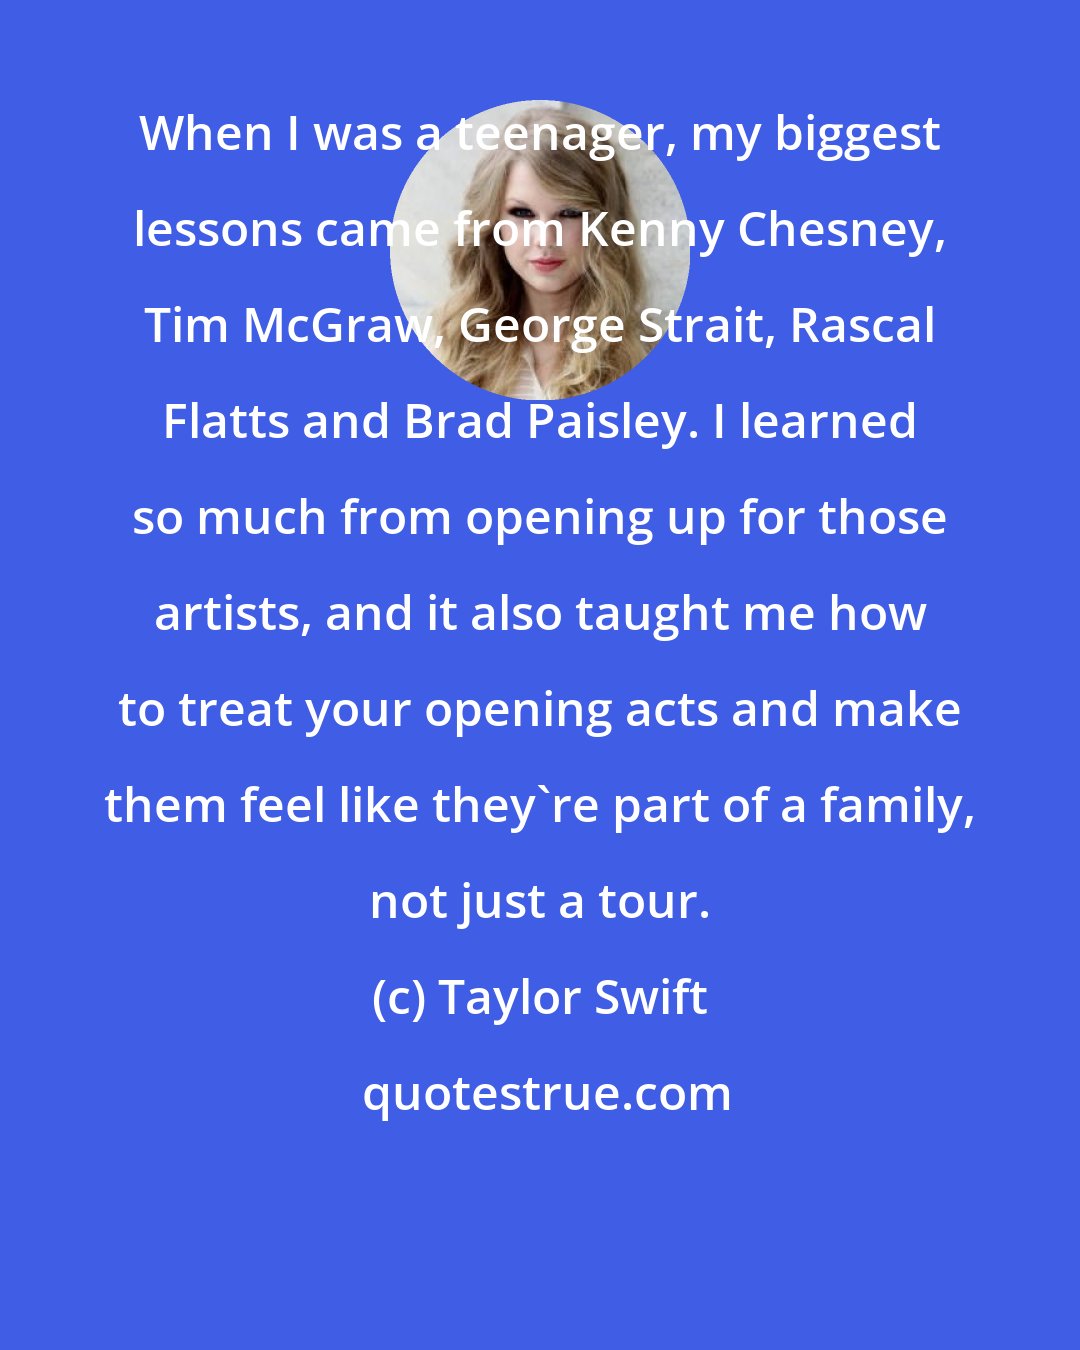 Taylor Swift: When I was a teenager, my biggest lessons came from Kenny Chesney, Tim McGraw, George Strait, Rascal Flatts and Brad Paisley. I learned so much from opening up for those artists, and it also taught me how to treat your opening acts and make them feel like they're part of a family, not just a tour.